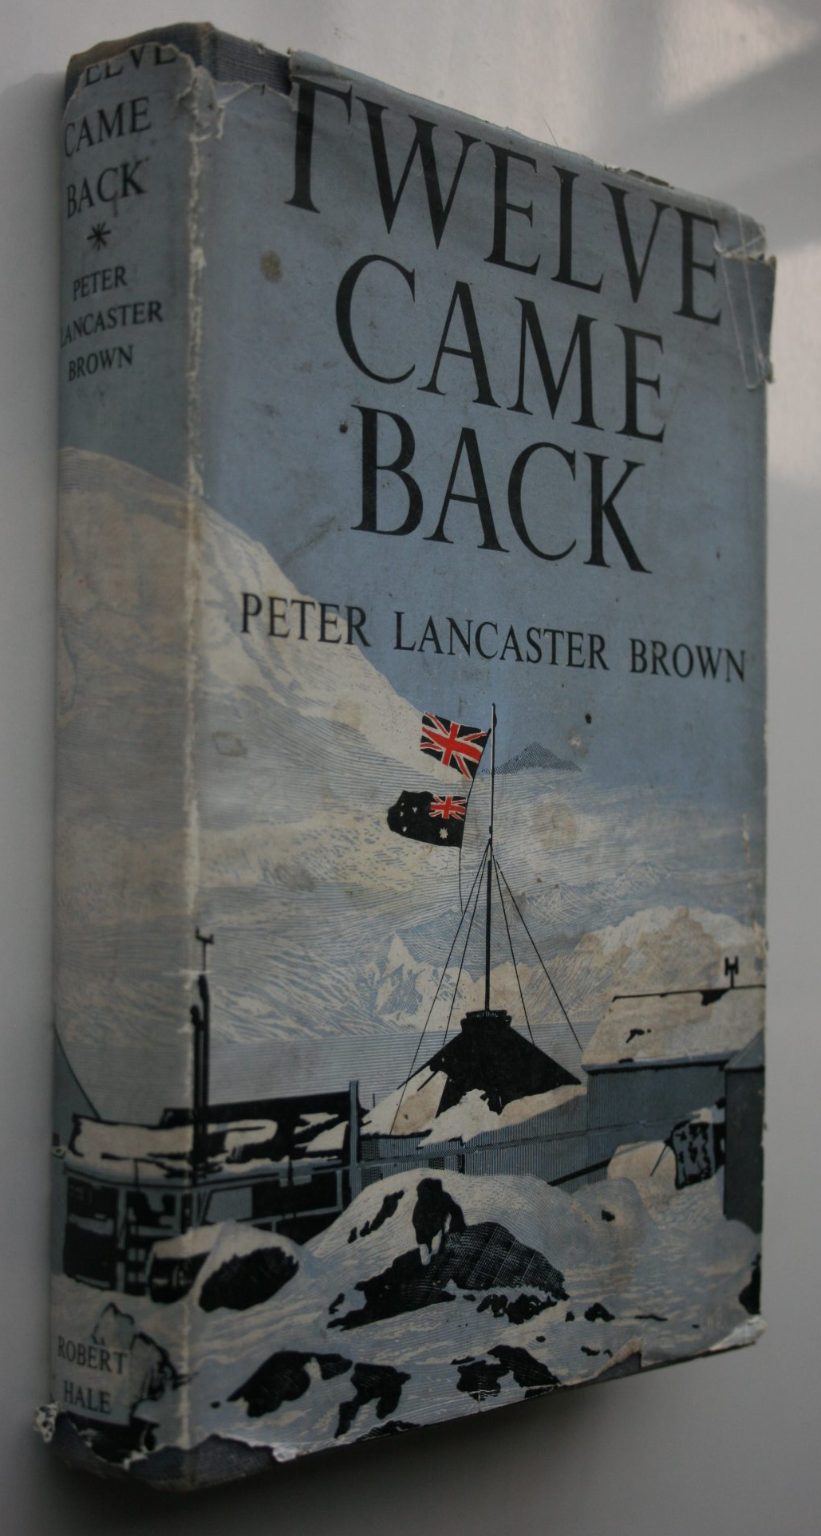 Twelve Came Back by Peter Lancaster Brown. 1957, first edition. SCARCE.